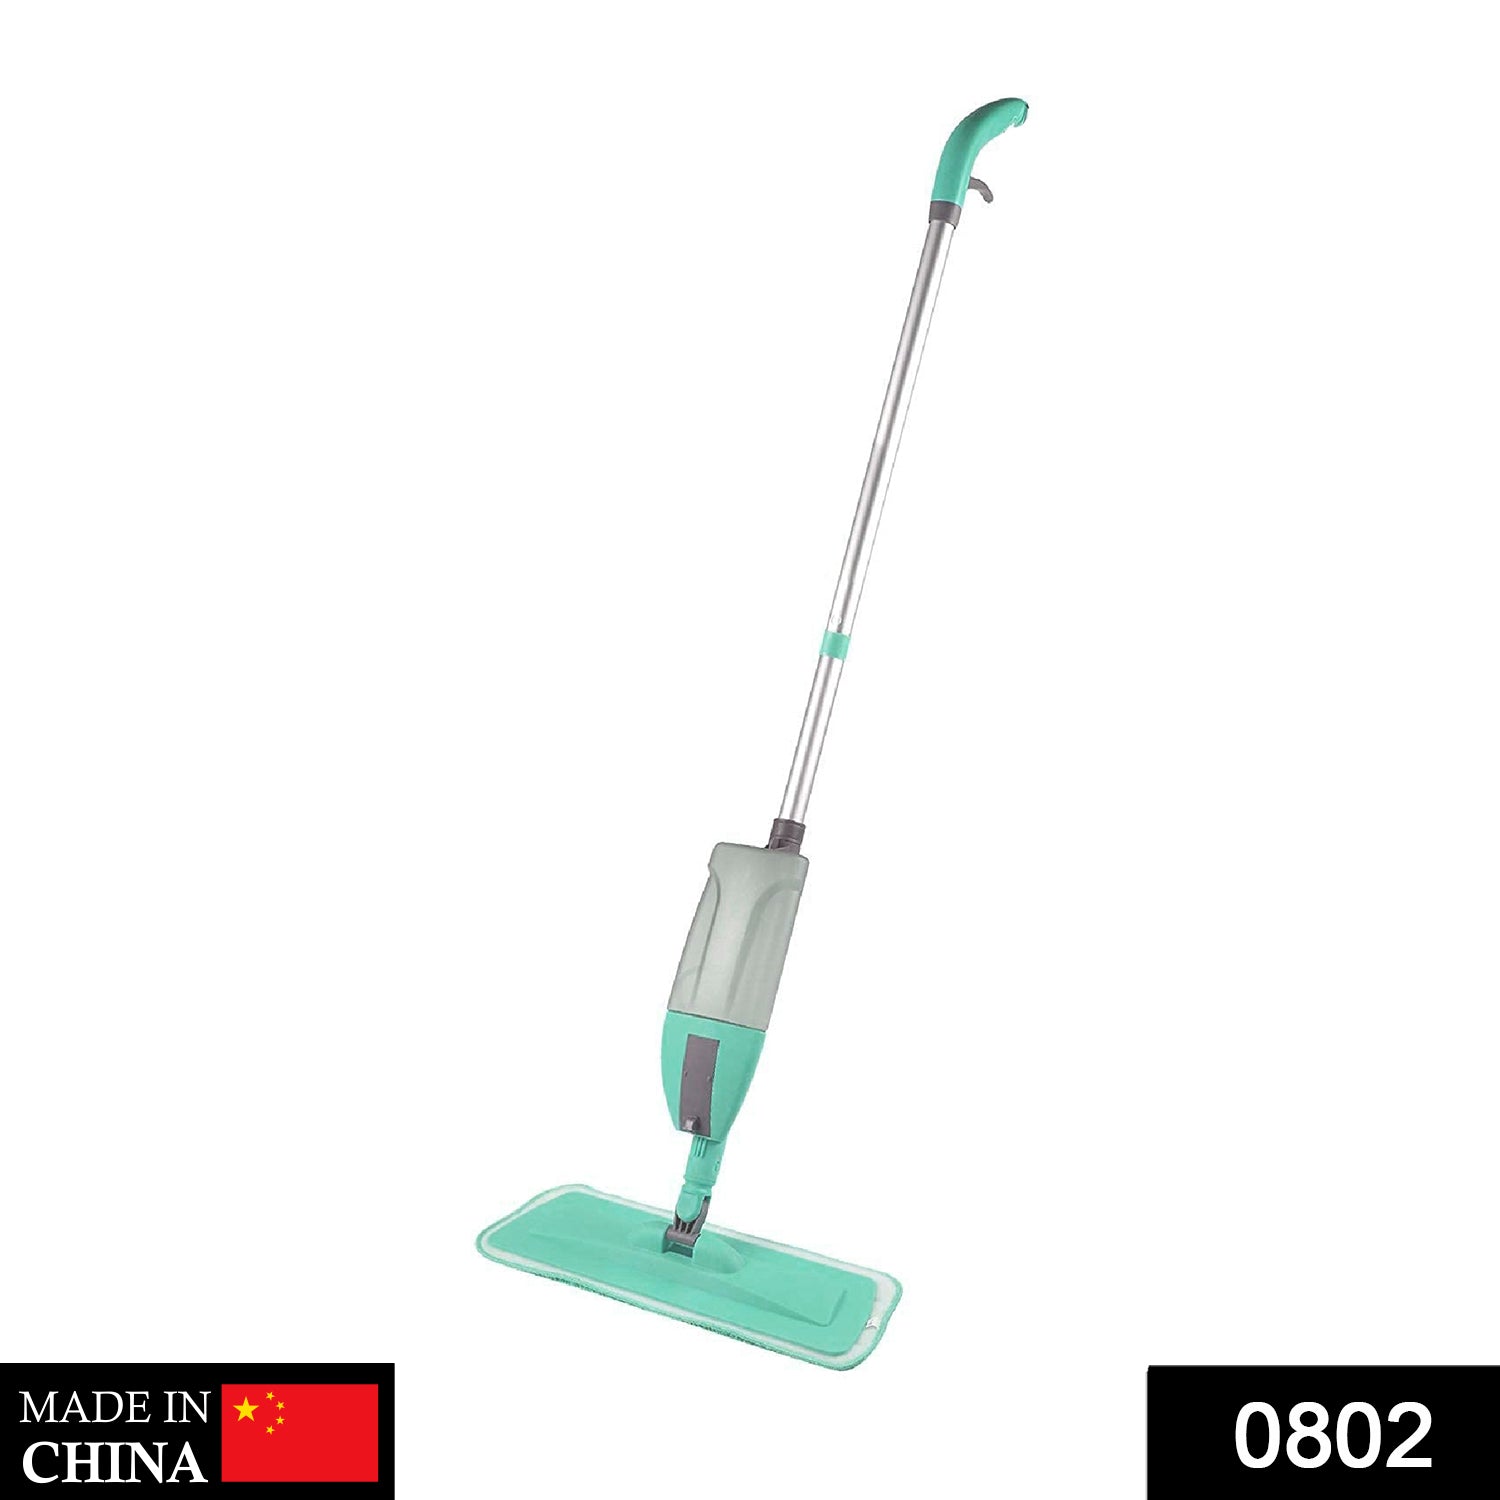 0802 Cleaning 360 Degree Healthy Spray Mop with Removable Washable Cleaning Pad 